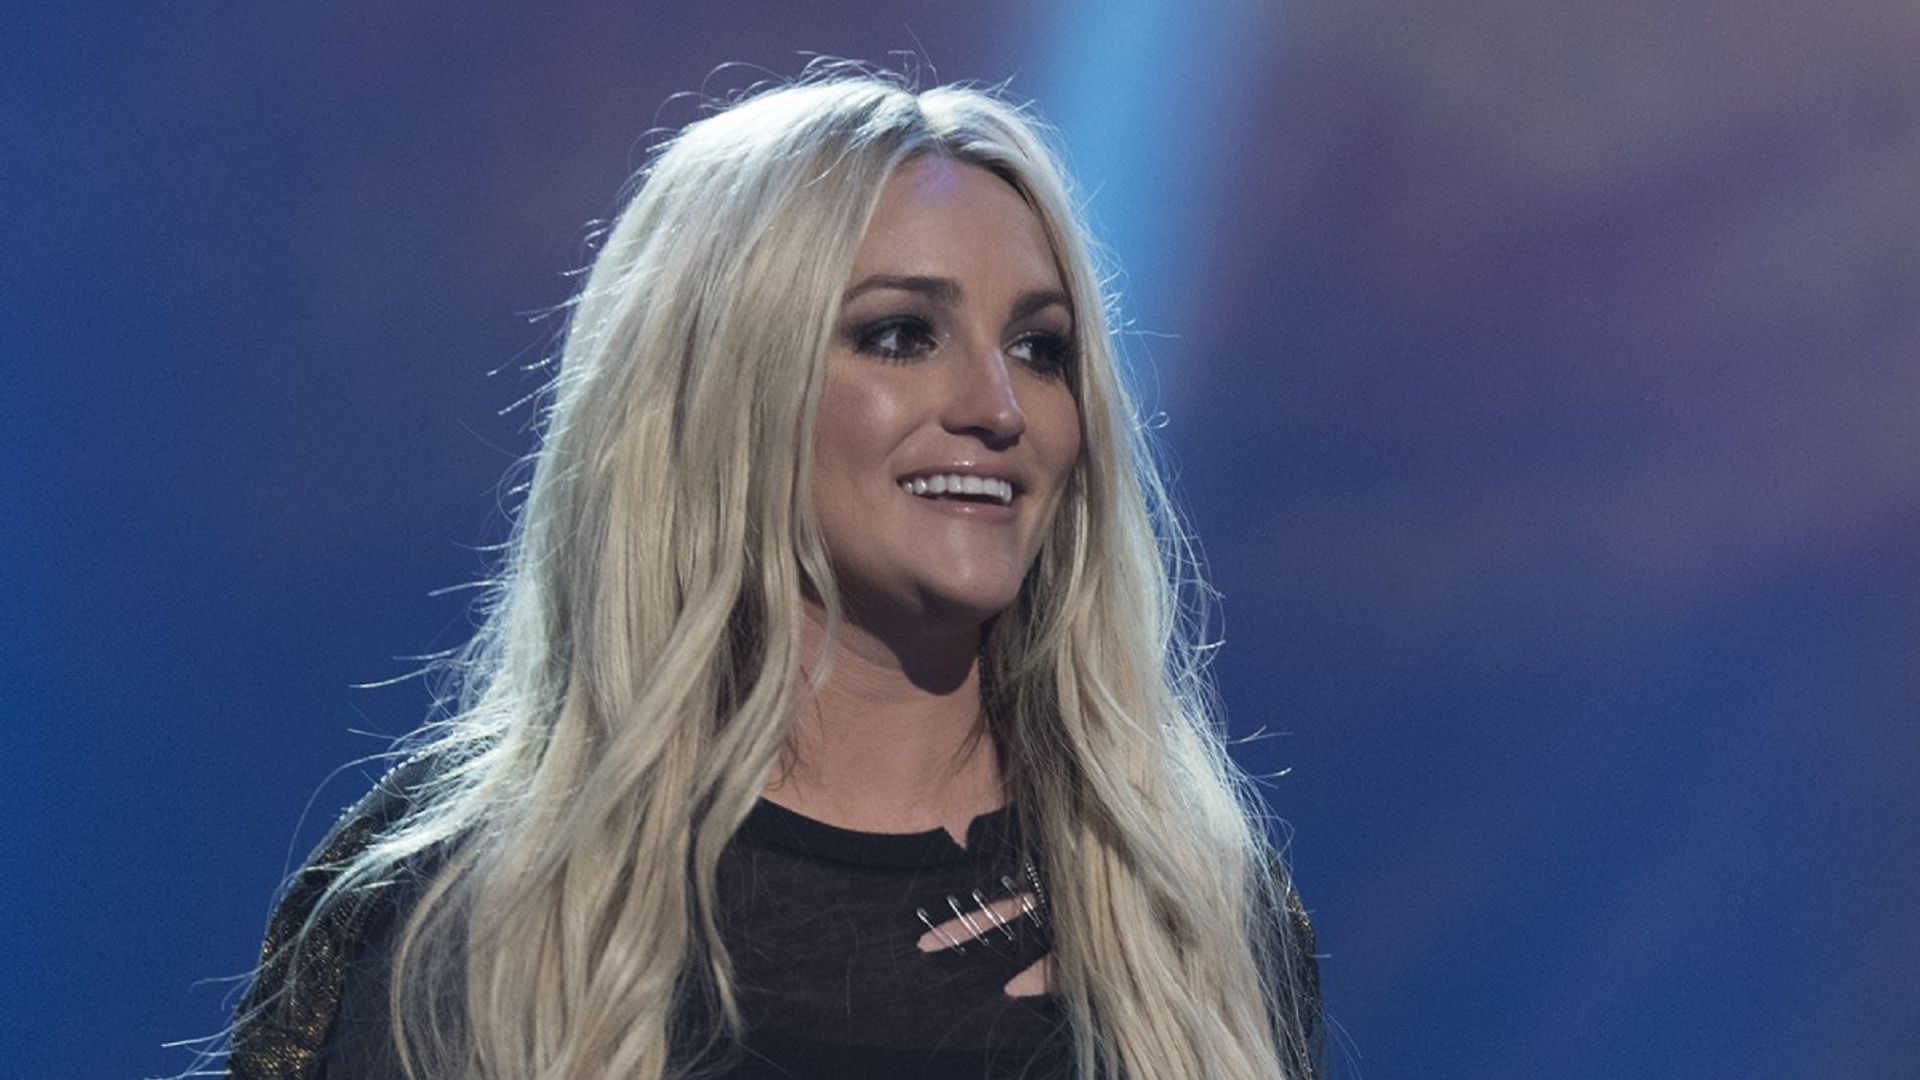 Jamie Lynn Spears shares surprising message with fans amid Britney Spears conservatorship case